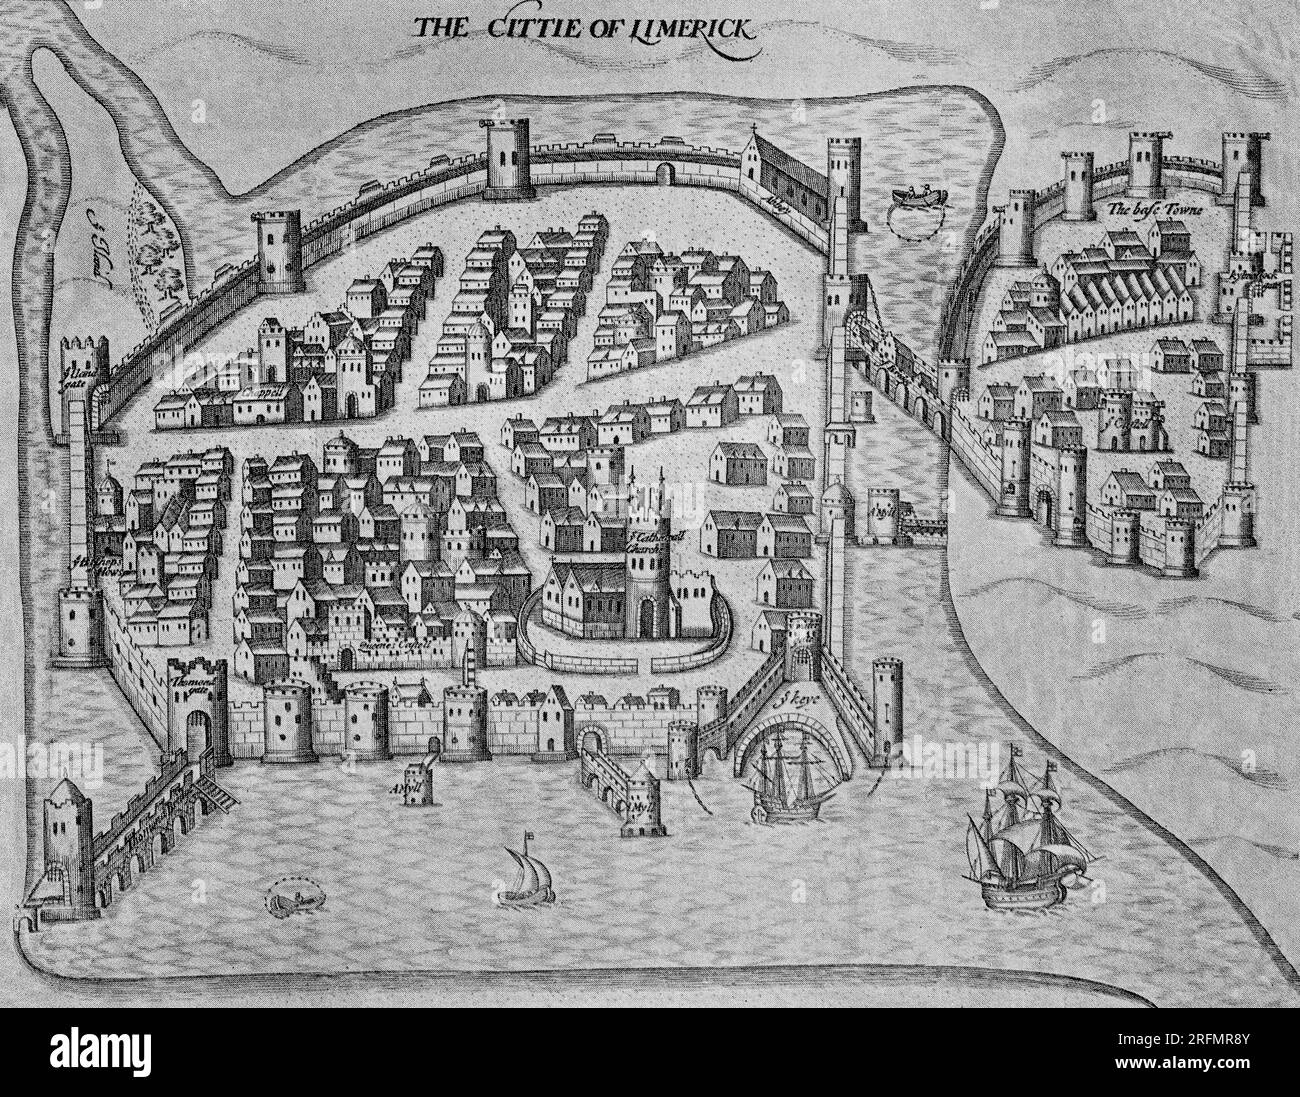 The City of Limerick as illustrated in Pacata Hibernia - a history of the wars in Ireland during the reign of Queen Elizabeth, especially within the province of Munster under the government of Sir George Carew, compiled by his direction and appointment and published in the early 17th century. Stock Photo